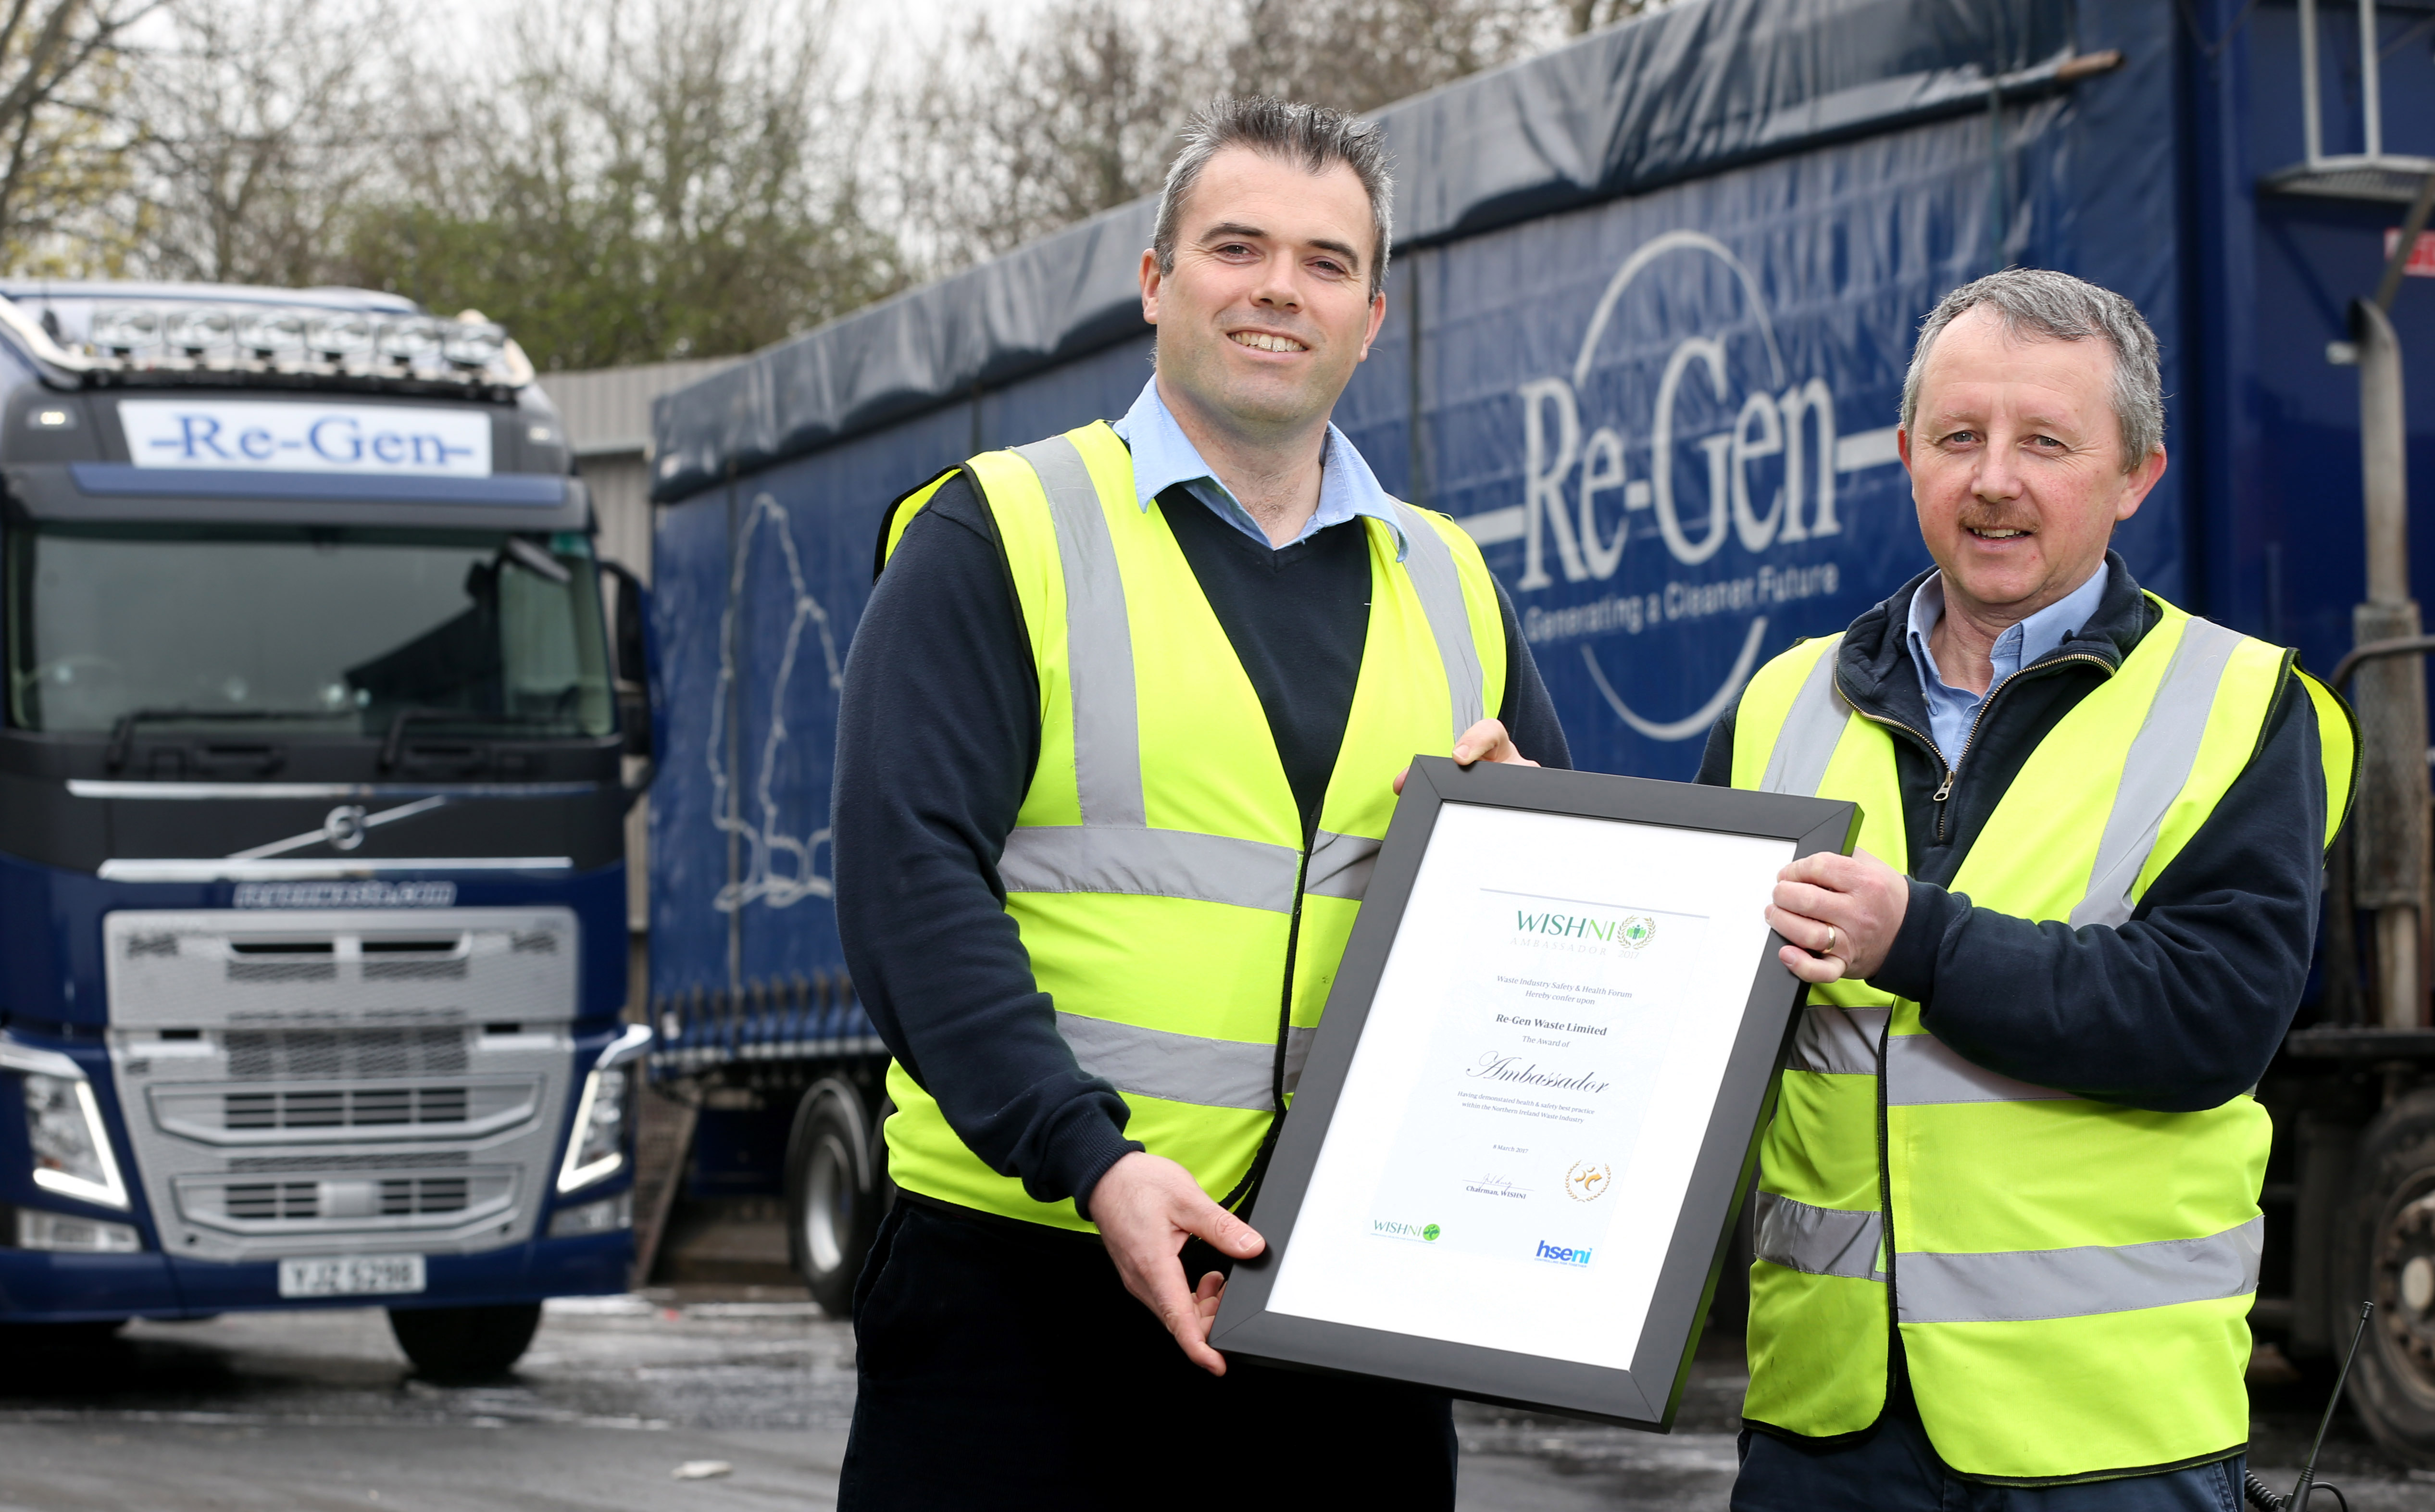 Re-Gen Waste Ltd receives major Health and Safety Industry Award